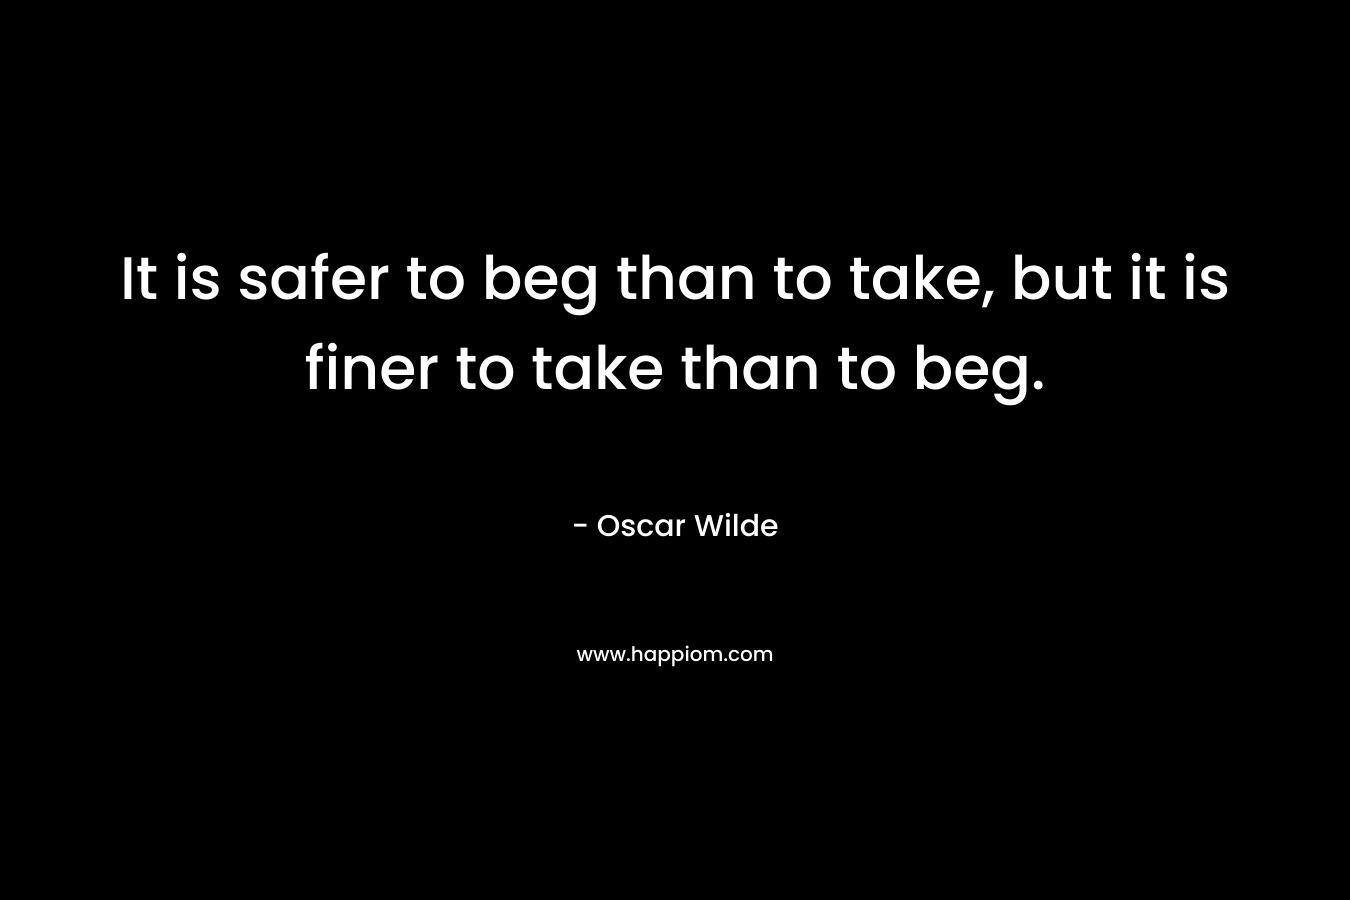 It is safer to beg than to take, but it is finer to take than to beg. – Oscar Wilde